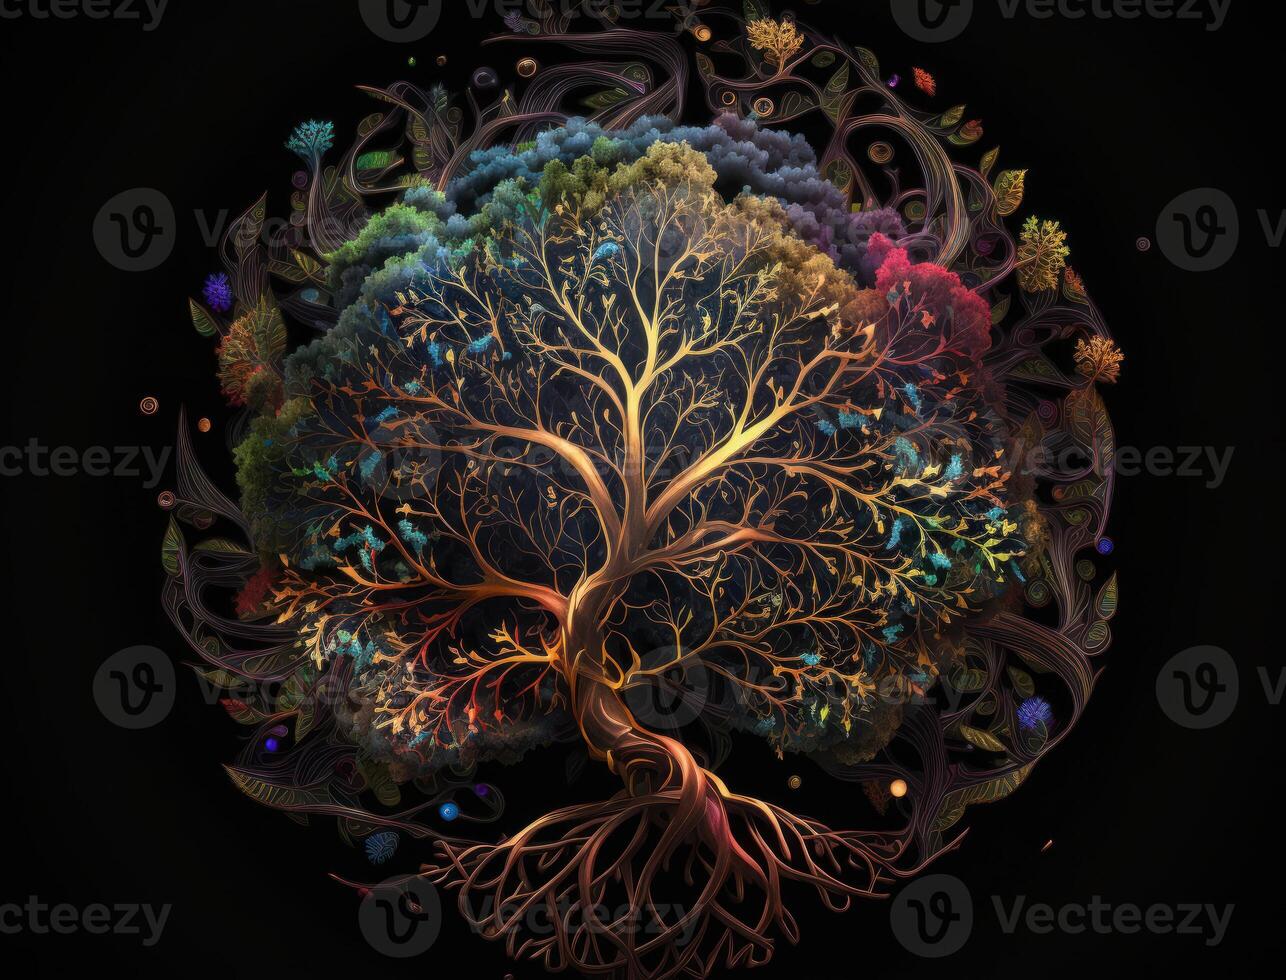 Yggdrasil world tree concept created with technology photo